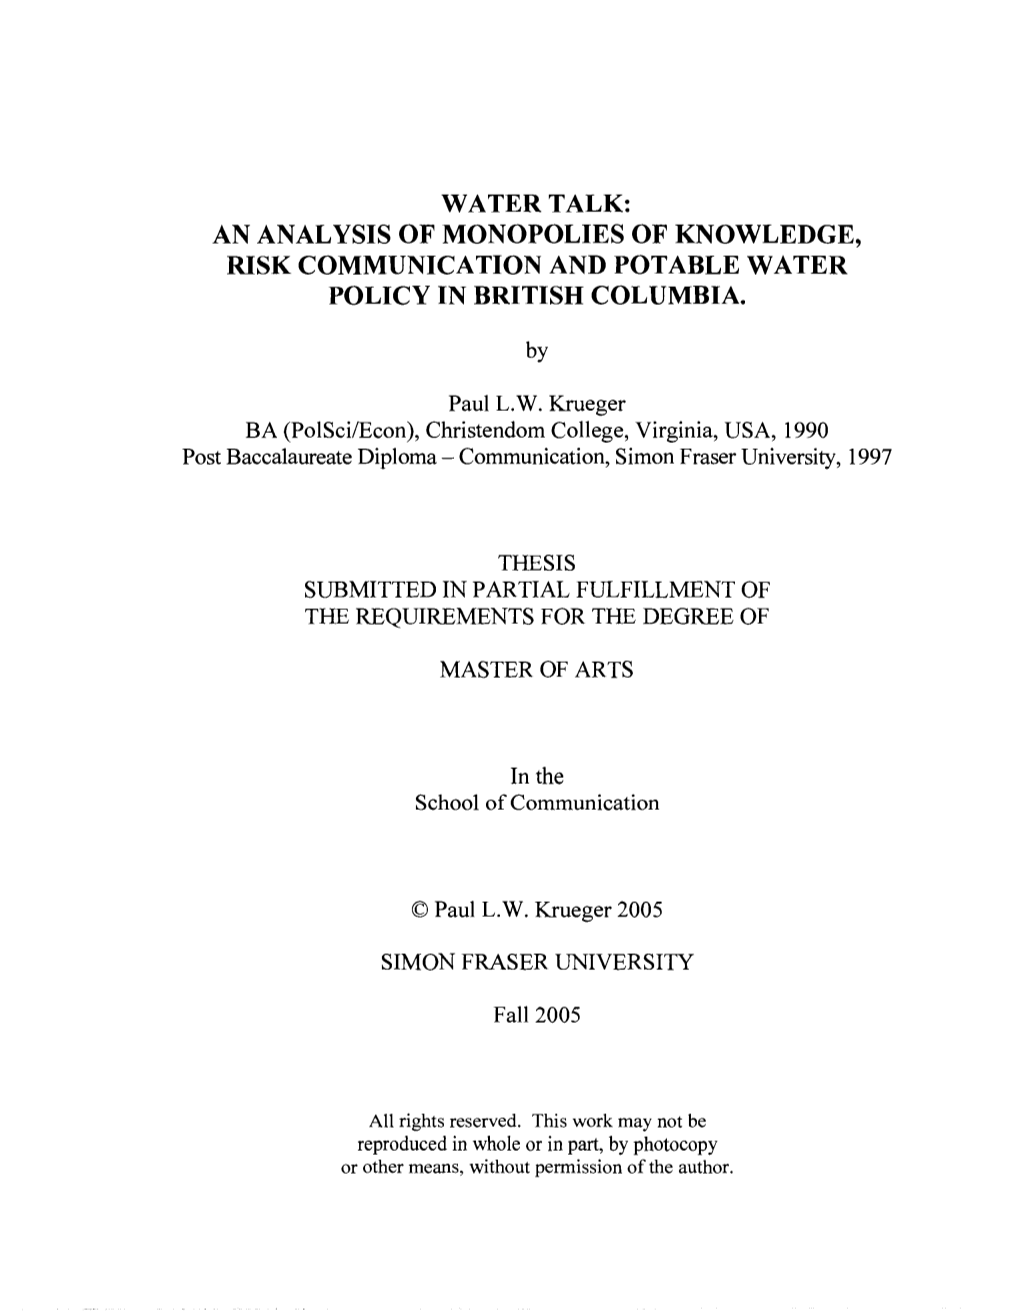 An Analysis of Monopolies of Knowledge, Risk Communication and Potable Water Policy in British Columbia